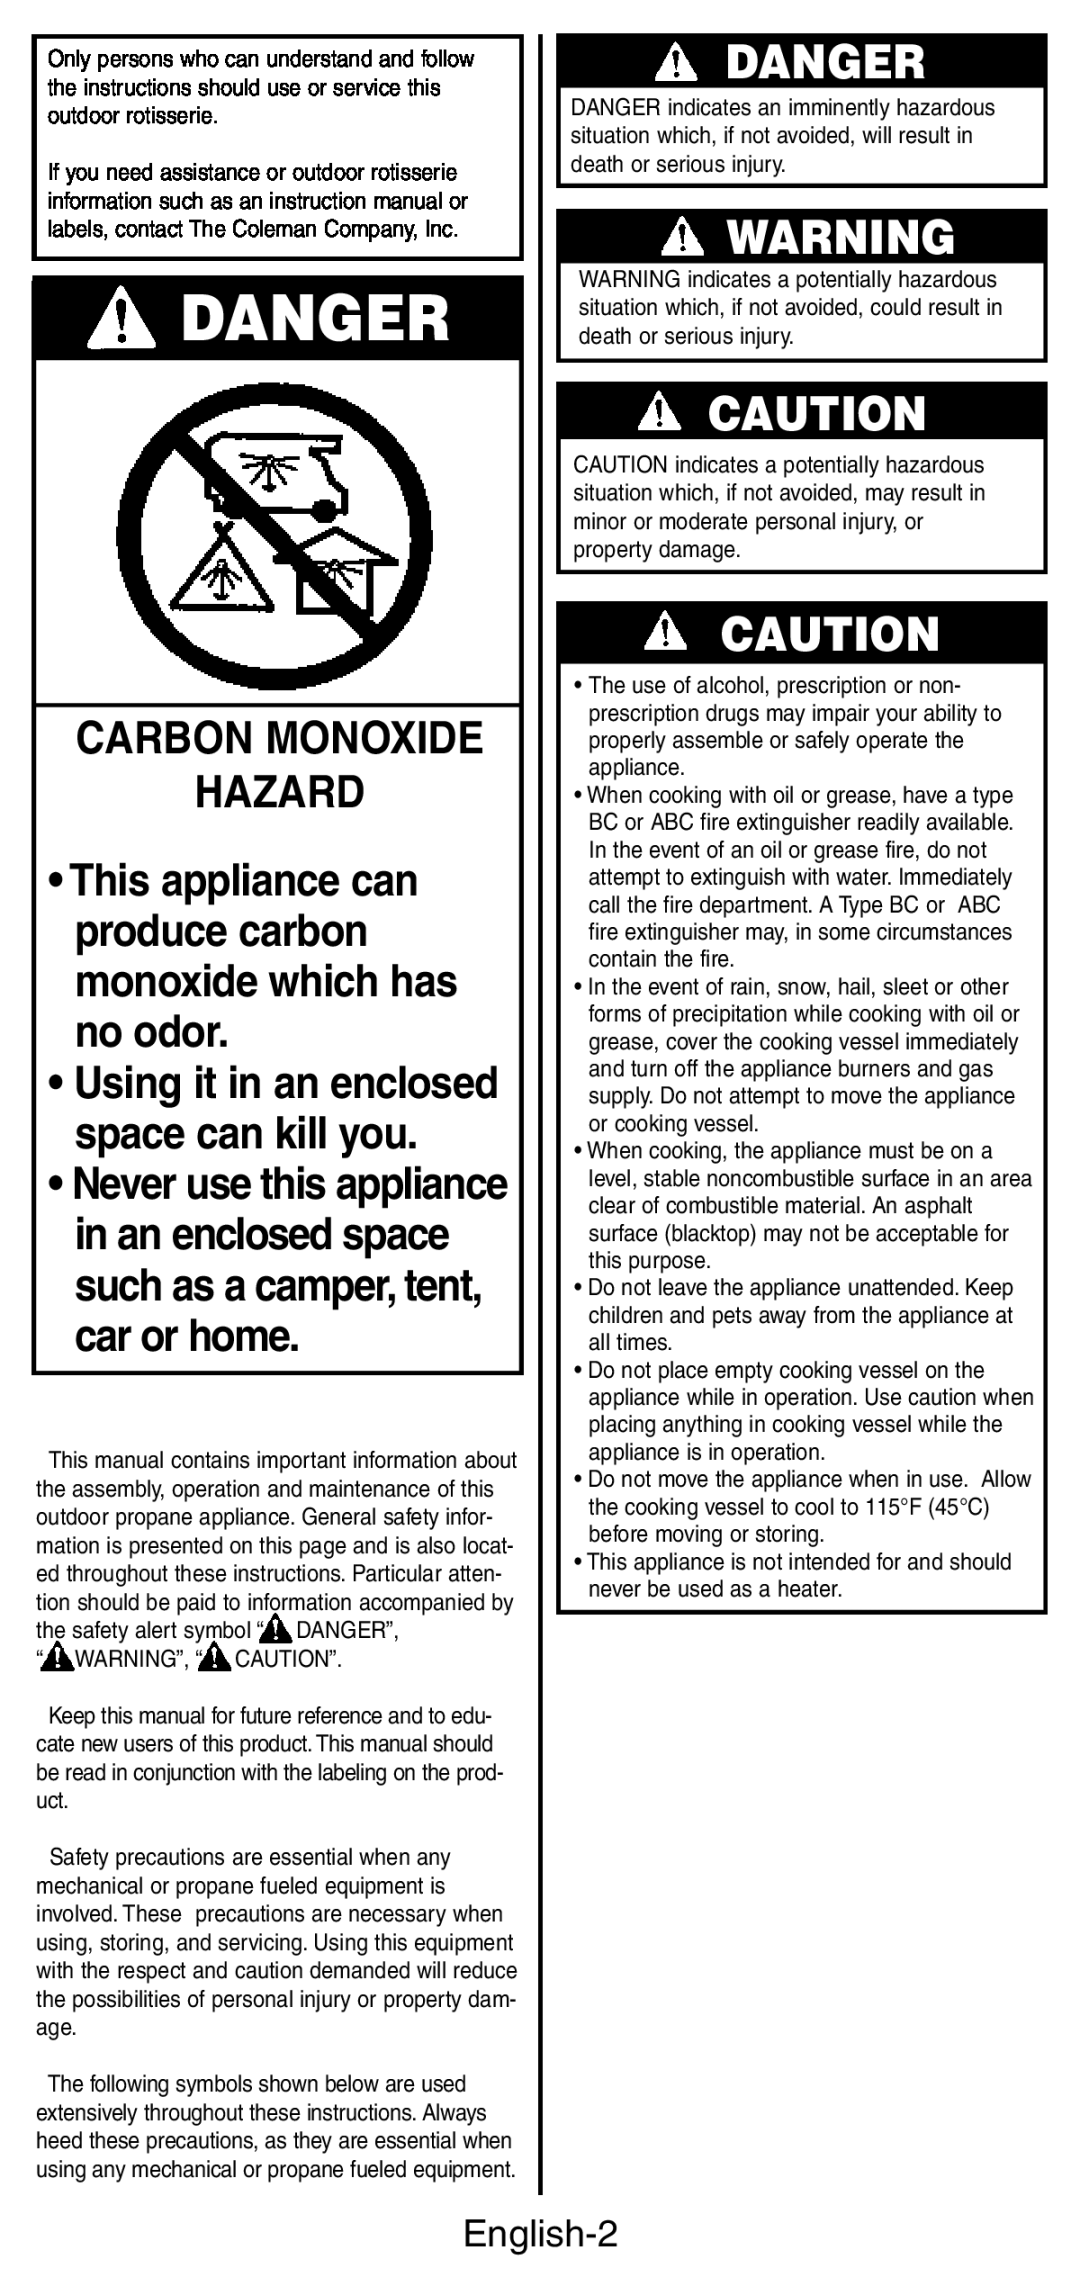 Coleman 9987 Series instruction manual Danger, This appliance can produce carbon monoxide which has no odor, English-2 